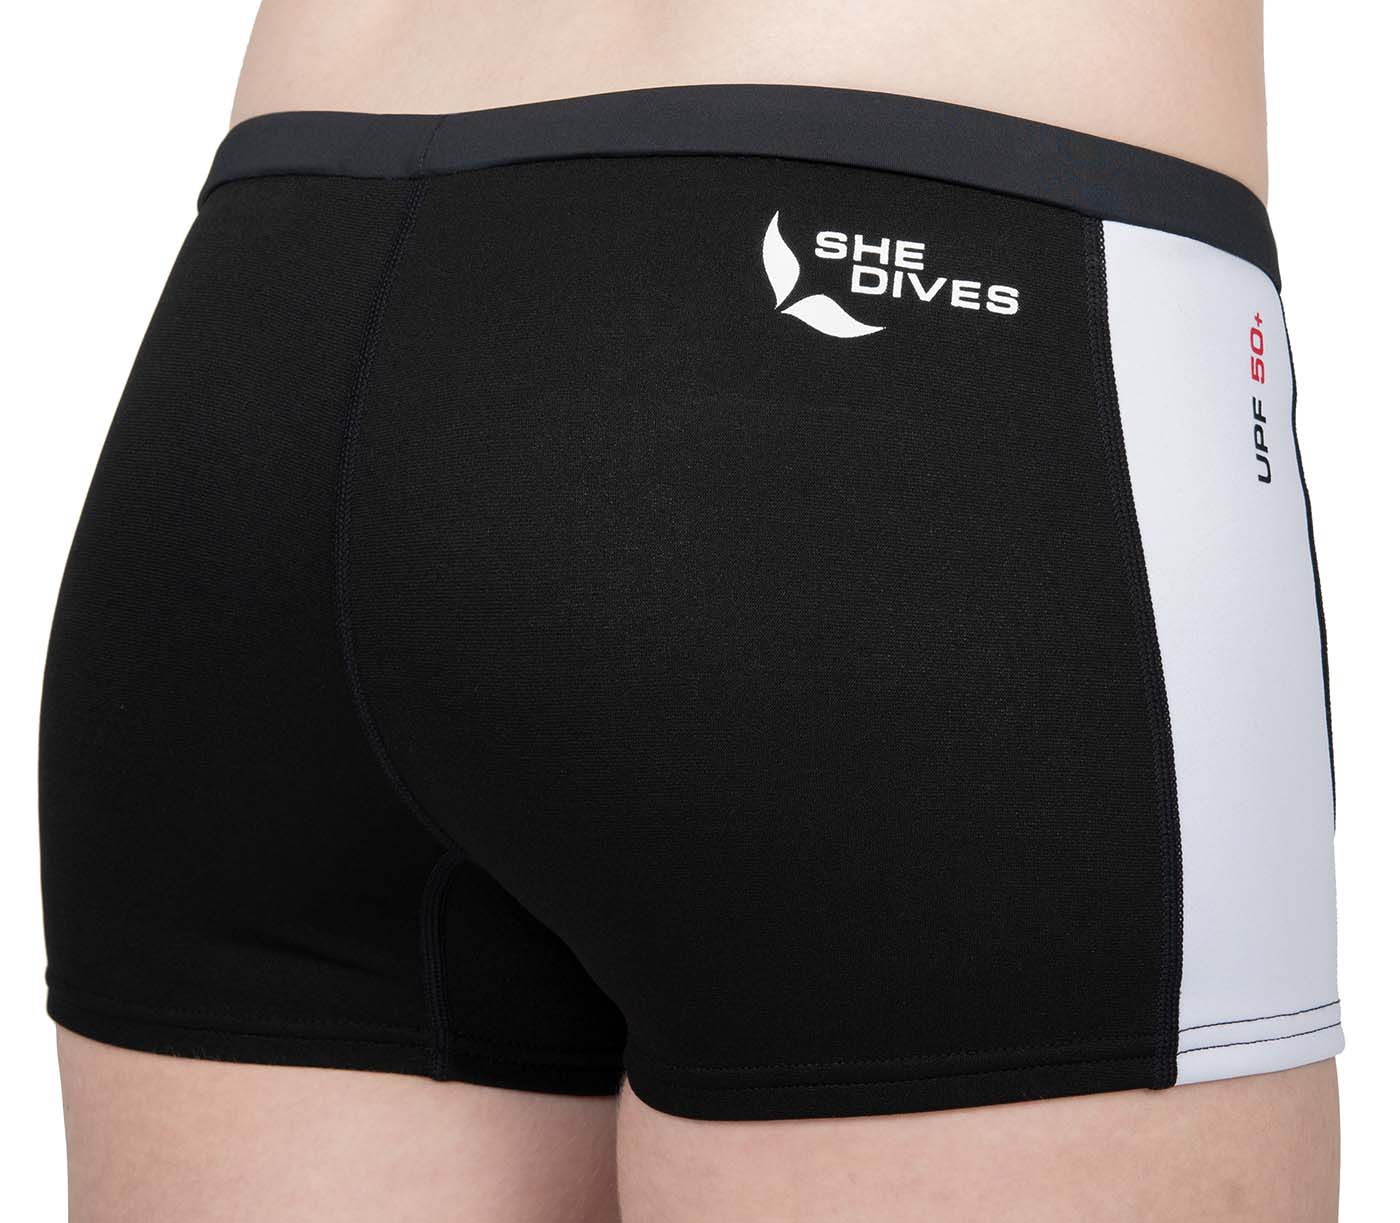 Thermo Guard Shorts 0,5mm - MARES